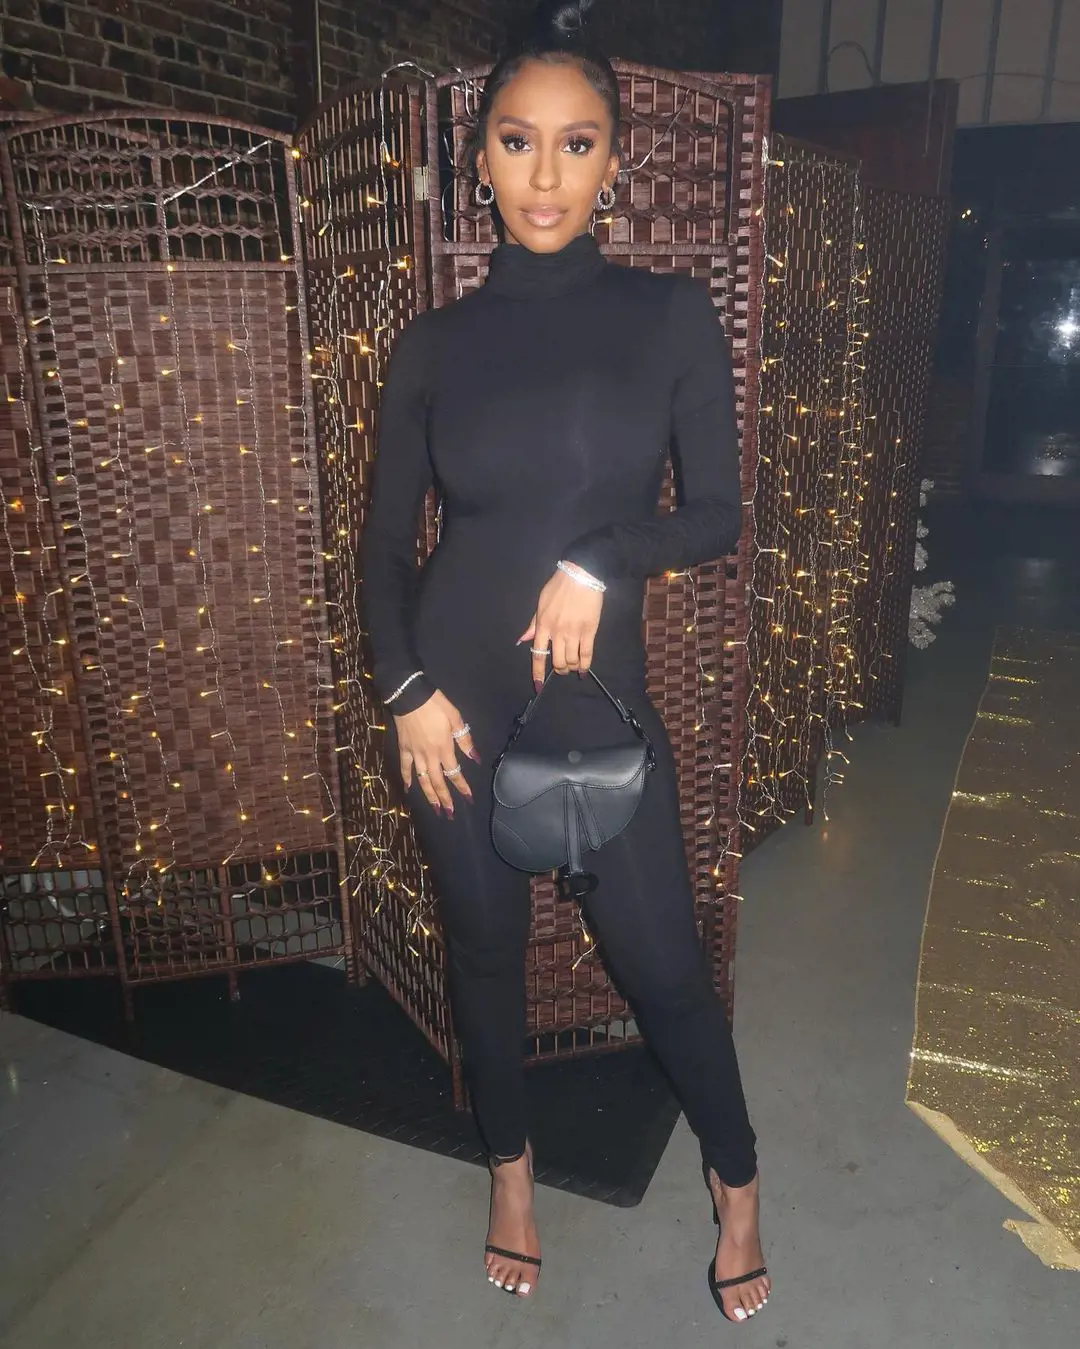 LaTanfernee looking stunning in a black outfit. 